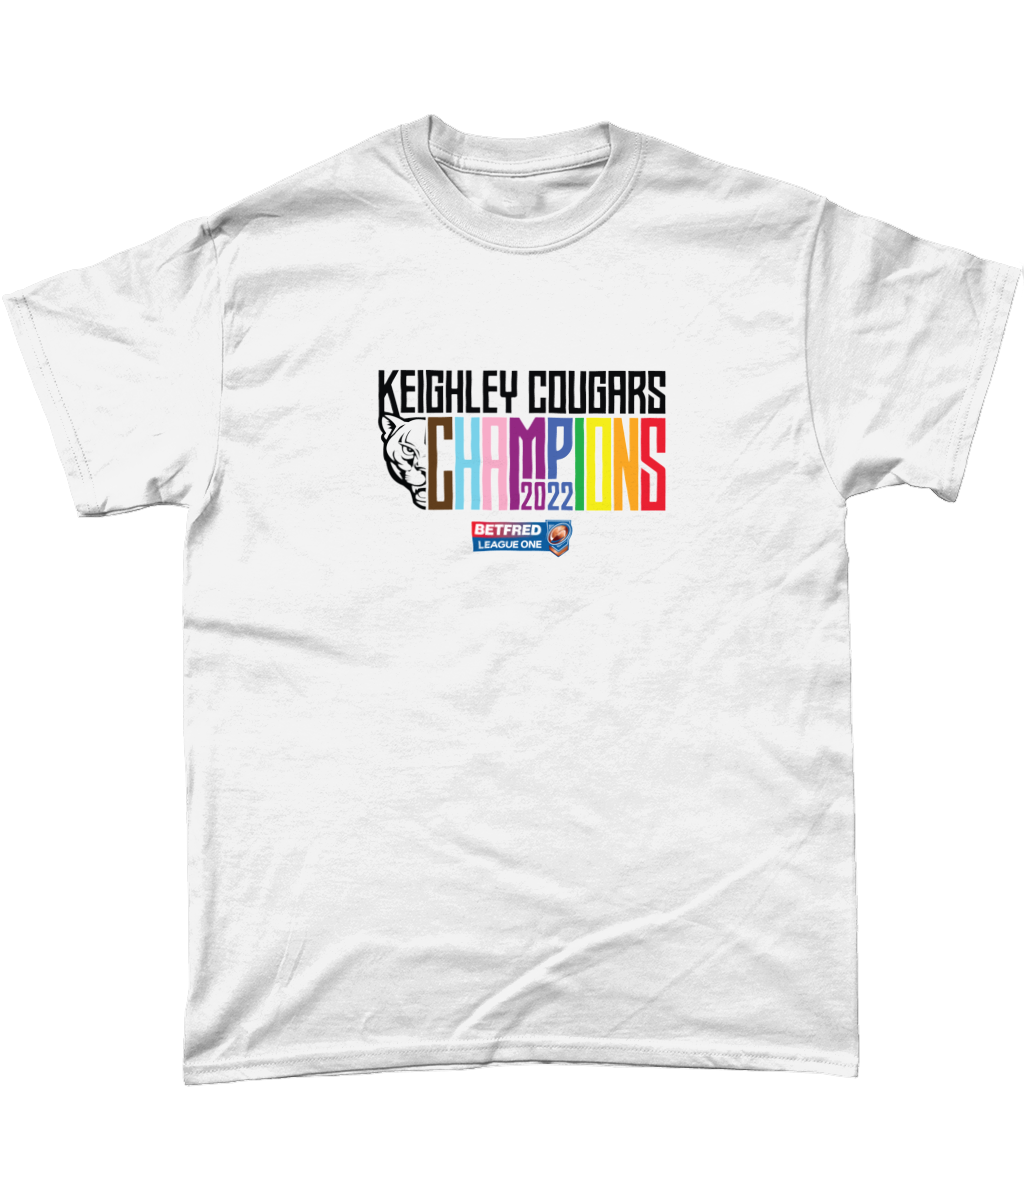 Keighley Cougars 2022 Champions T-Shirt White